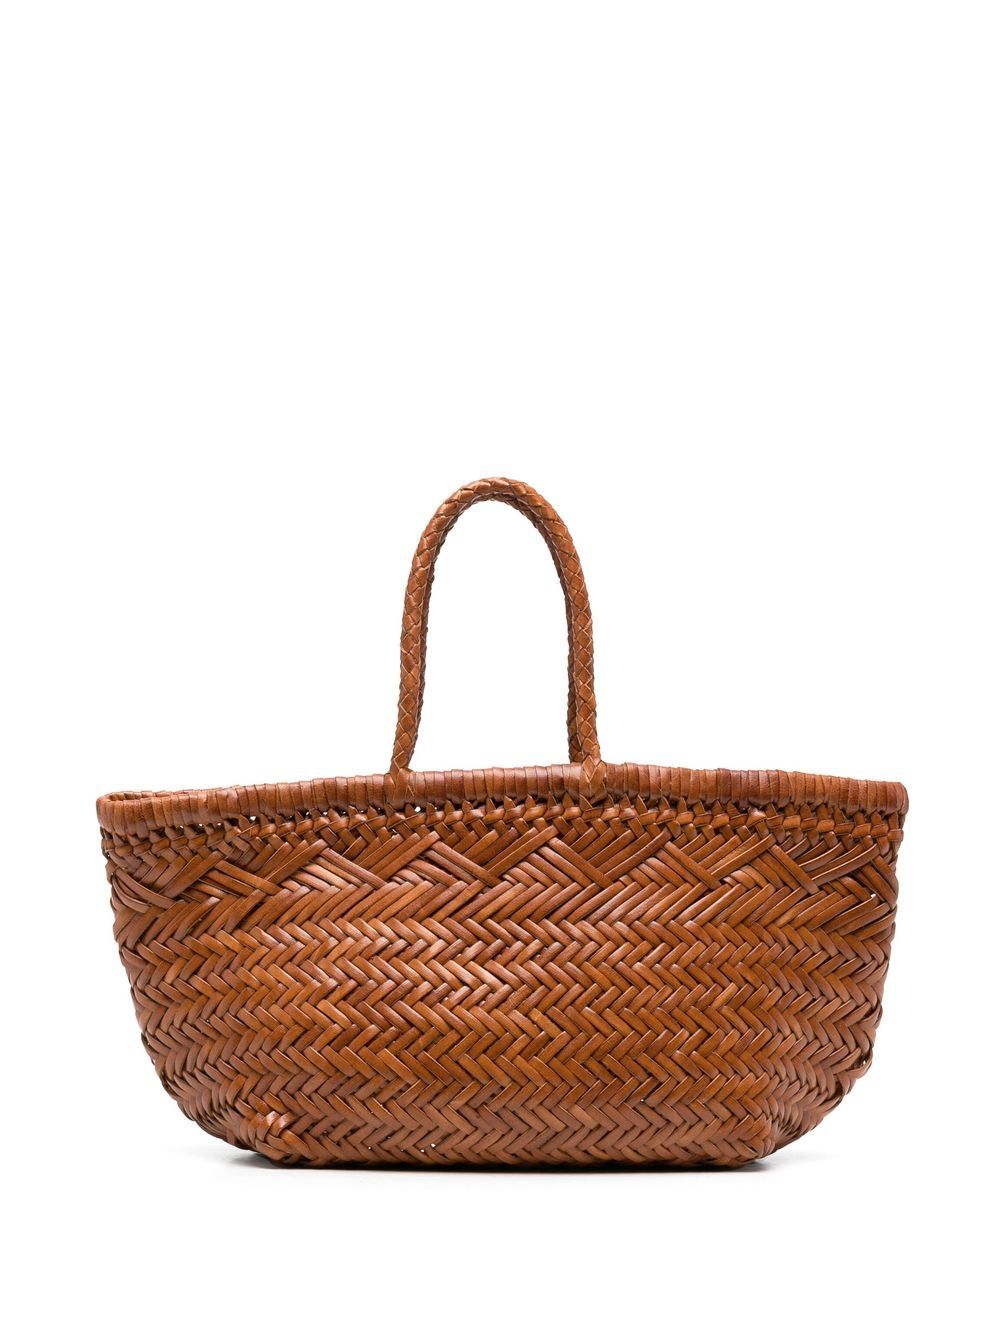 Triple Jump Woven Leather Tote Bag